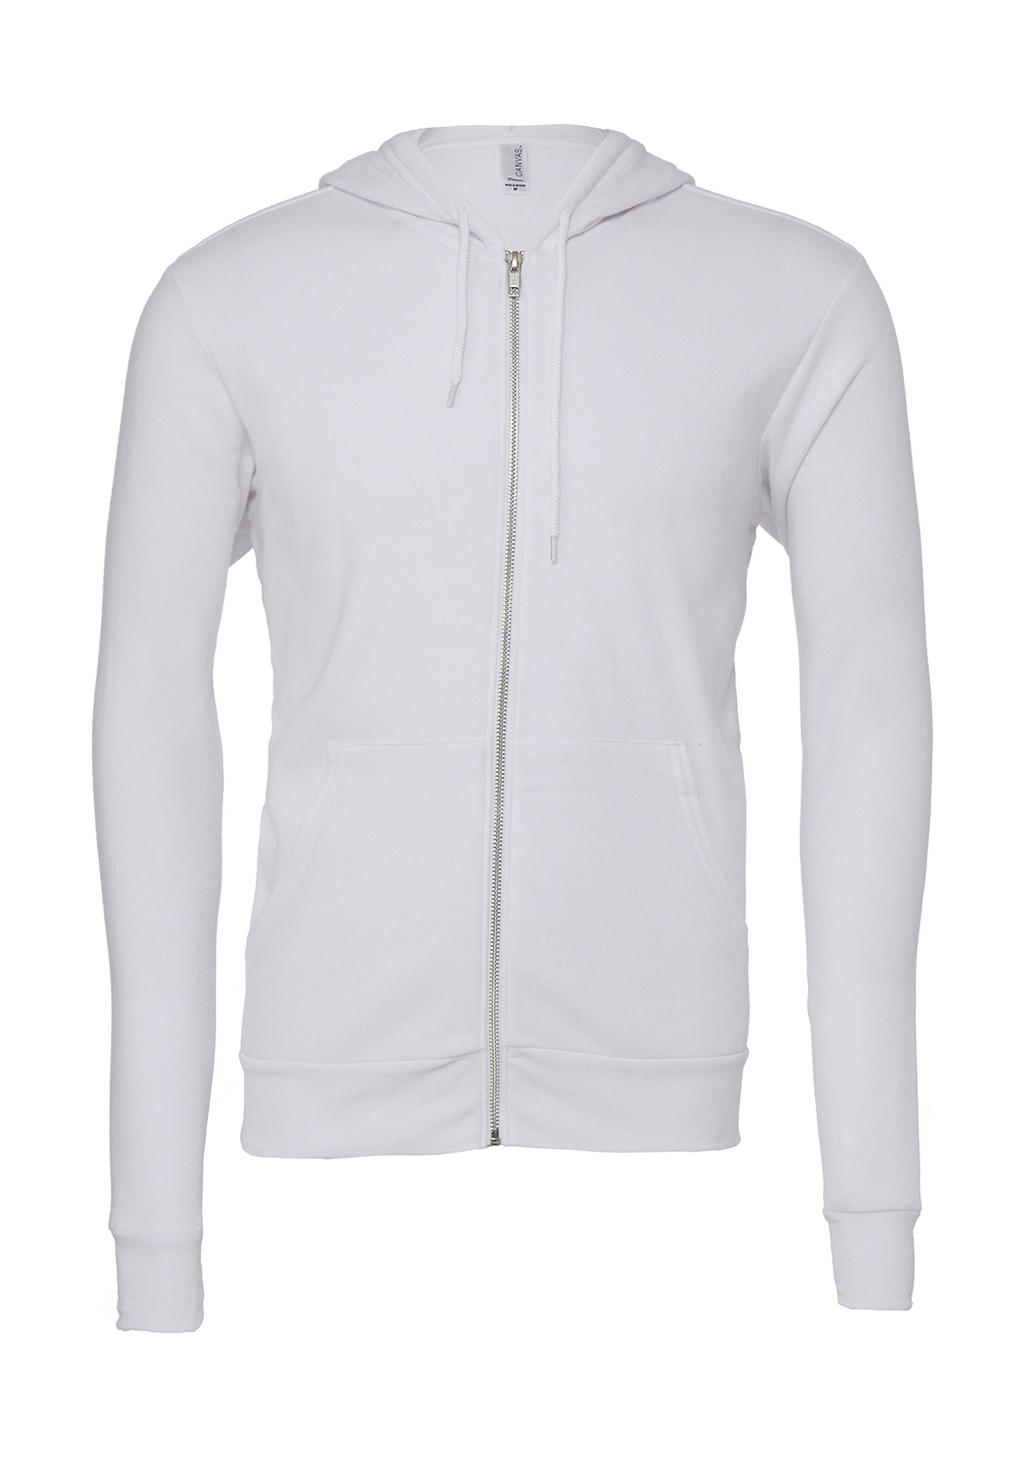  Unisex Poly-Cotton Full Zip Hoodie in Farbe White